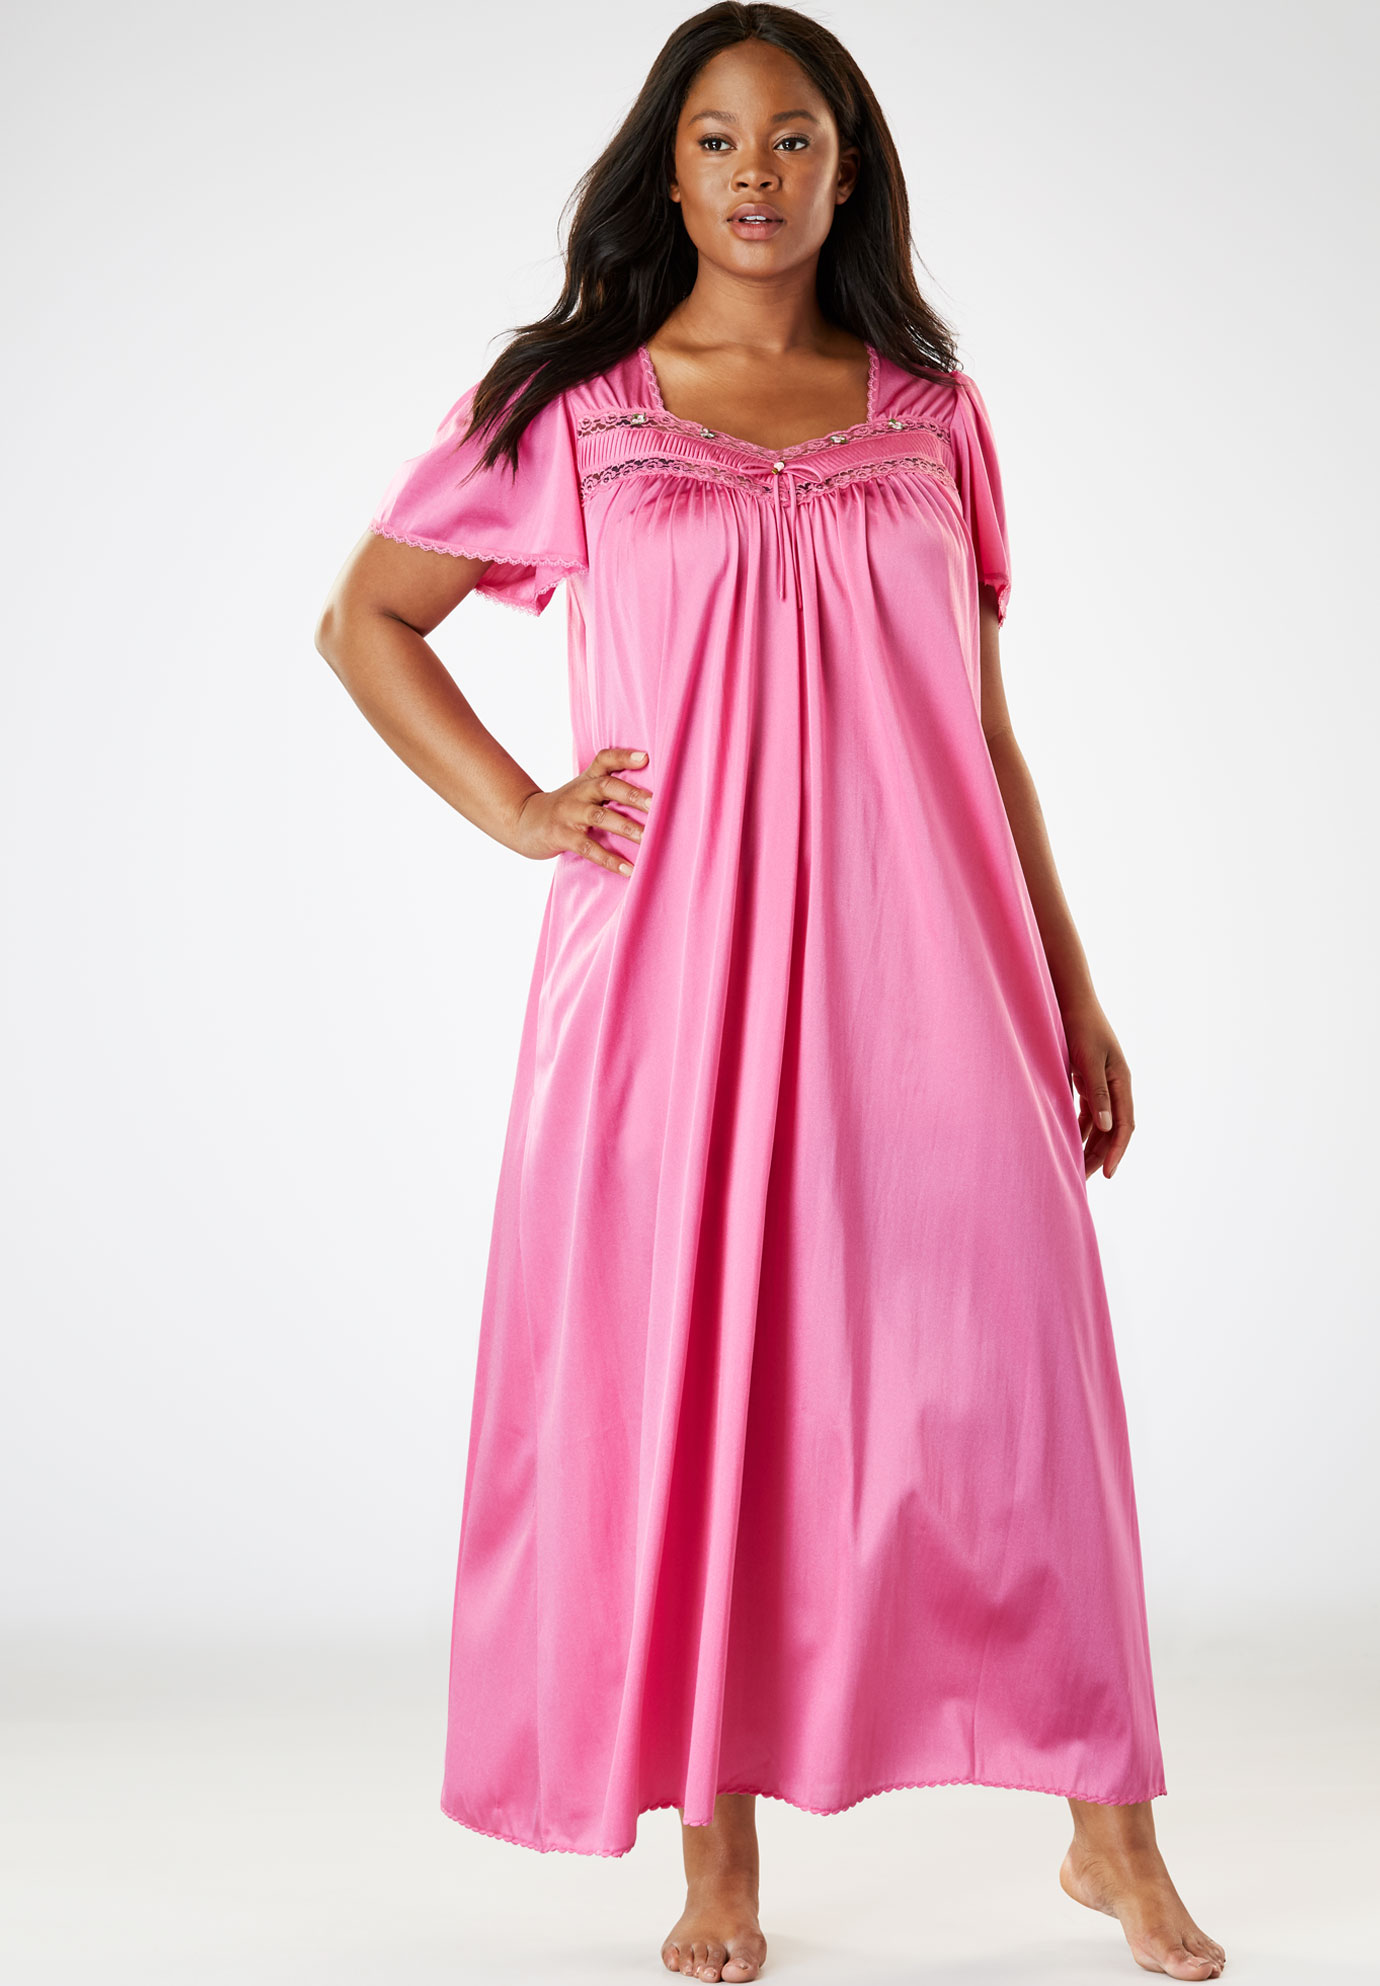 Full Sweep Nightgown By Only Necessities® Plus Size Sleep Gowns Jessica London